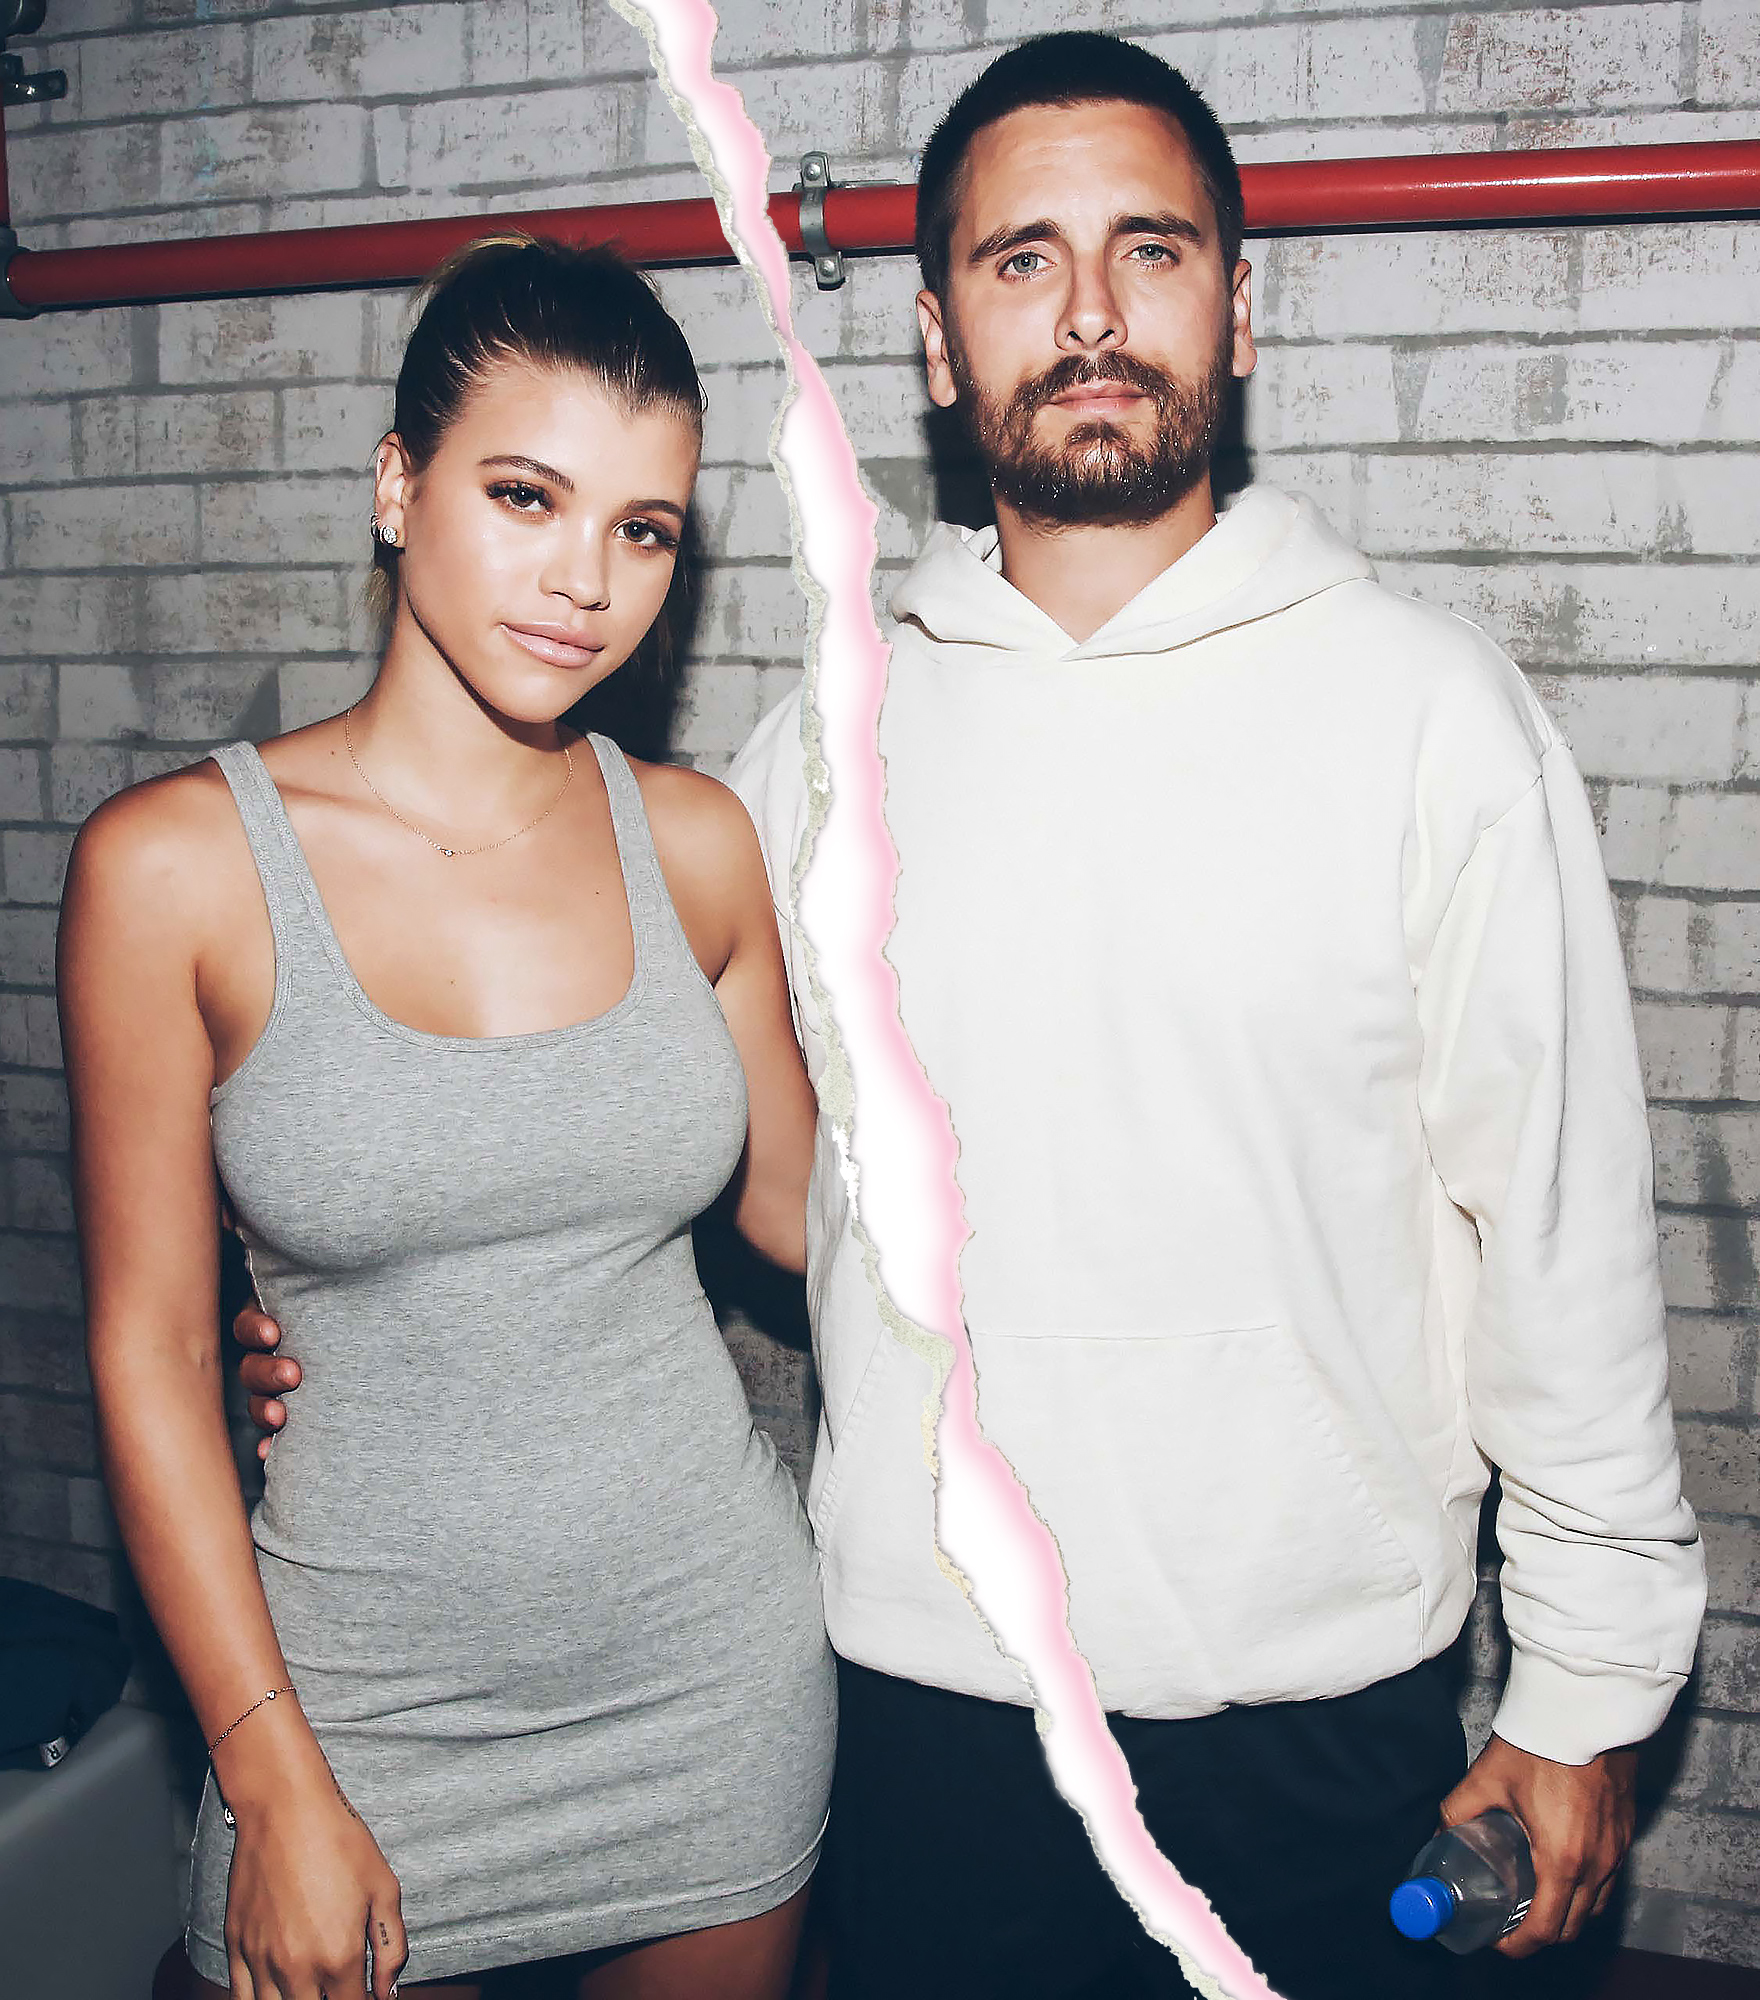 Sofia Richie Spends Time With Another Man While Scott Disick Is Away